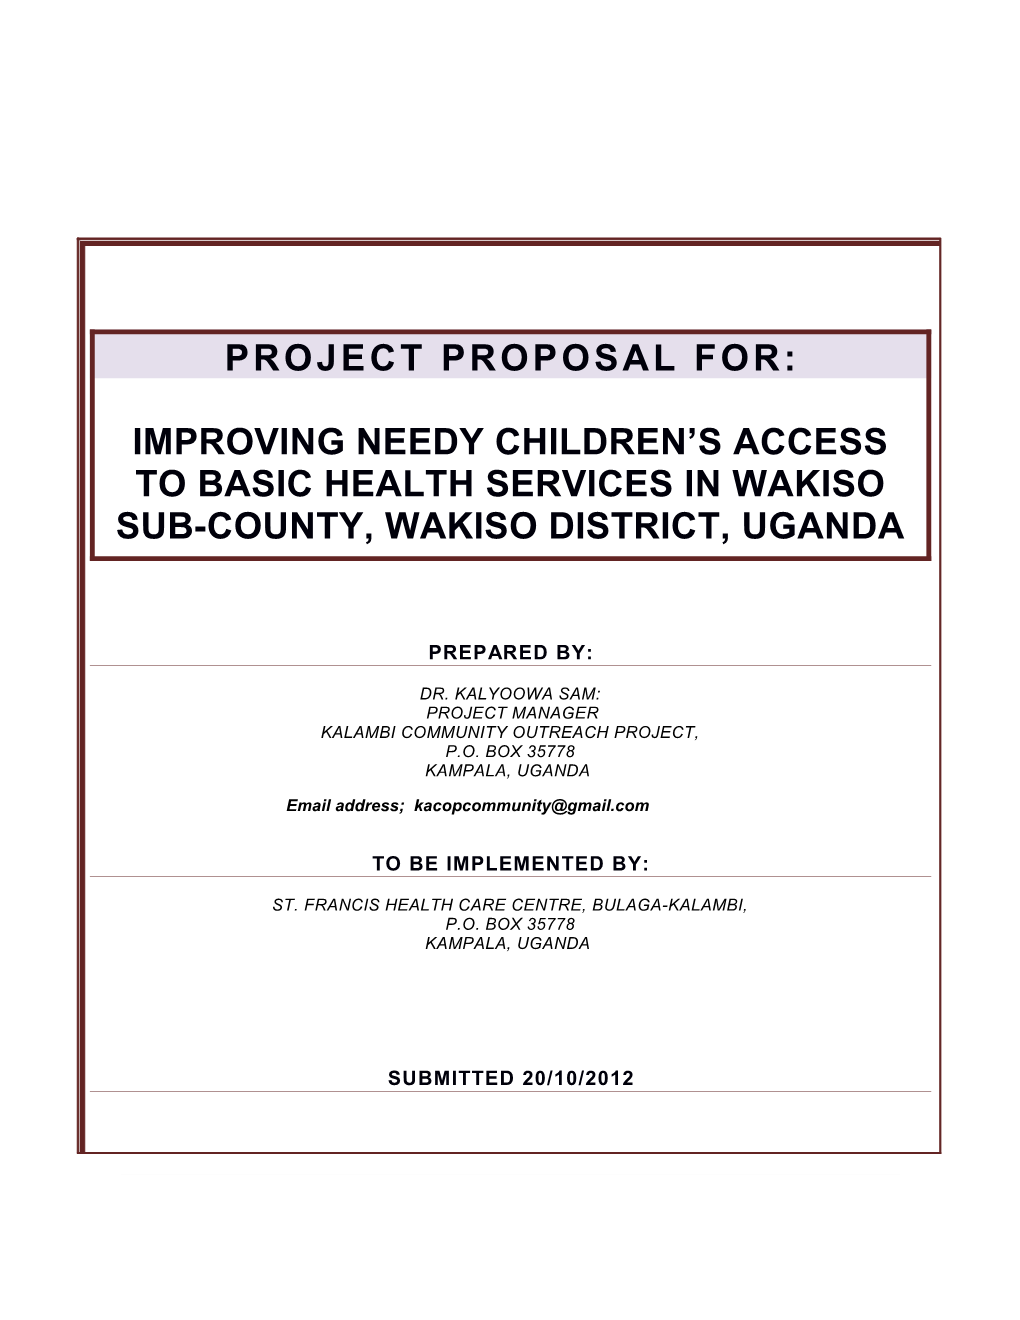 Project Proposal For: IMPROVING NEEDY Children S ACCESS to BASIC HEALTH SERVICES in WAKISO